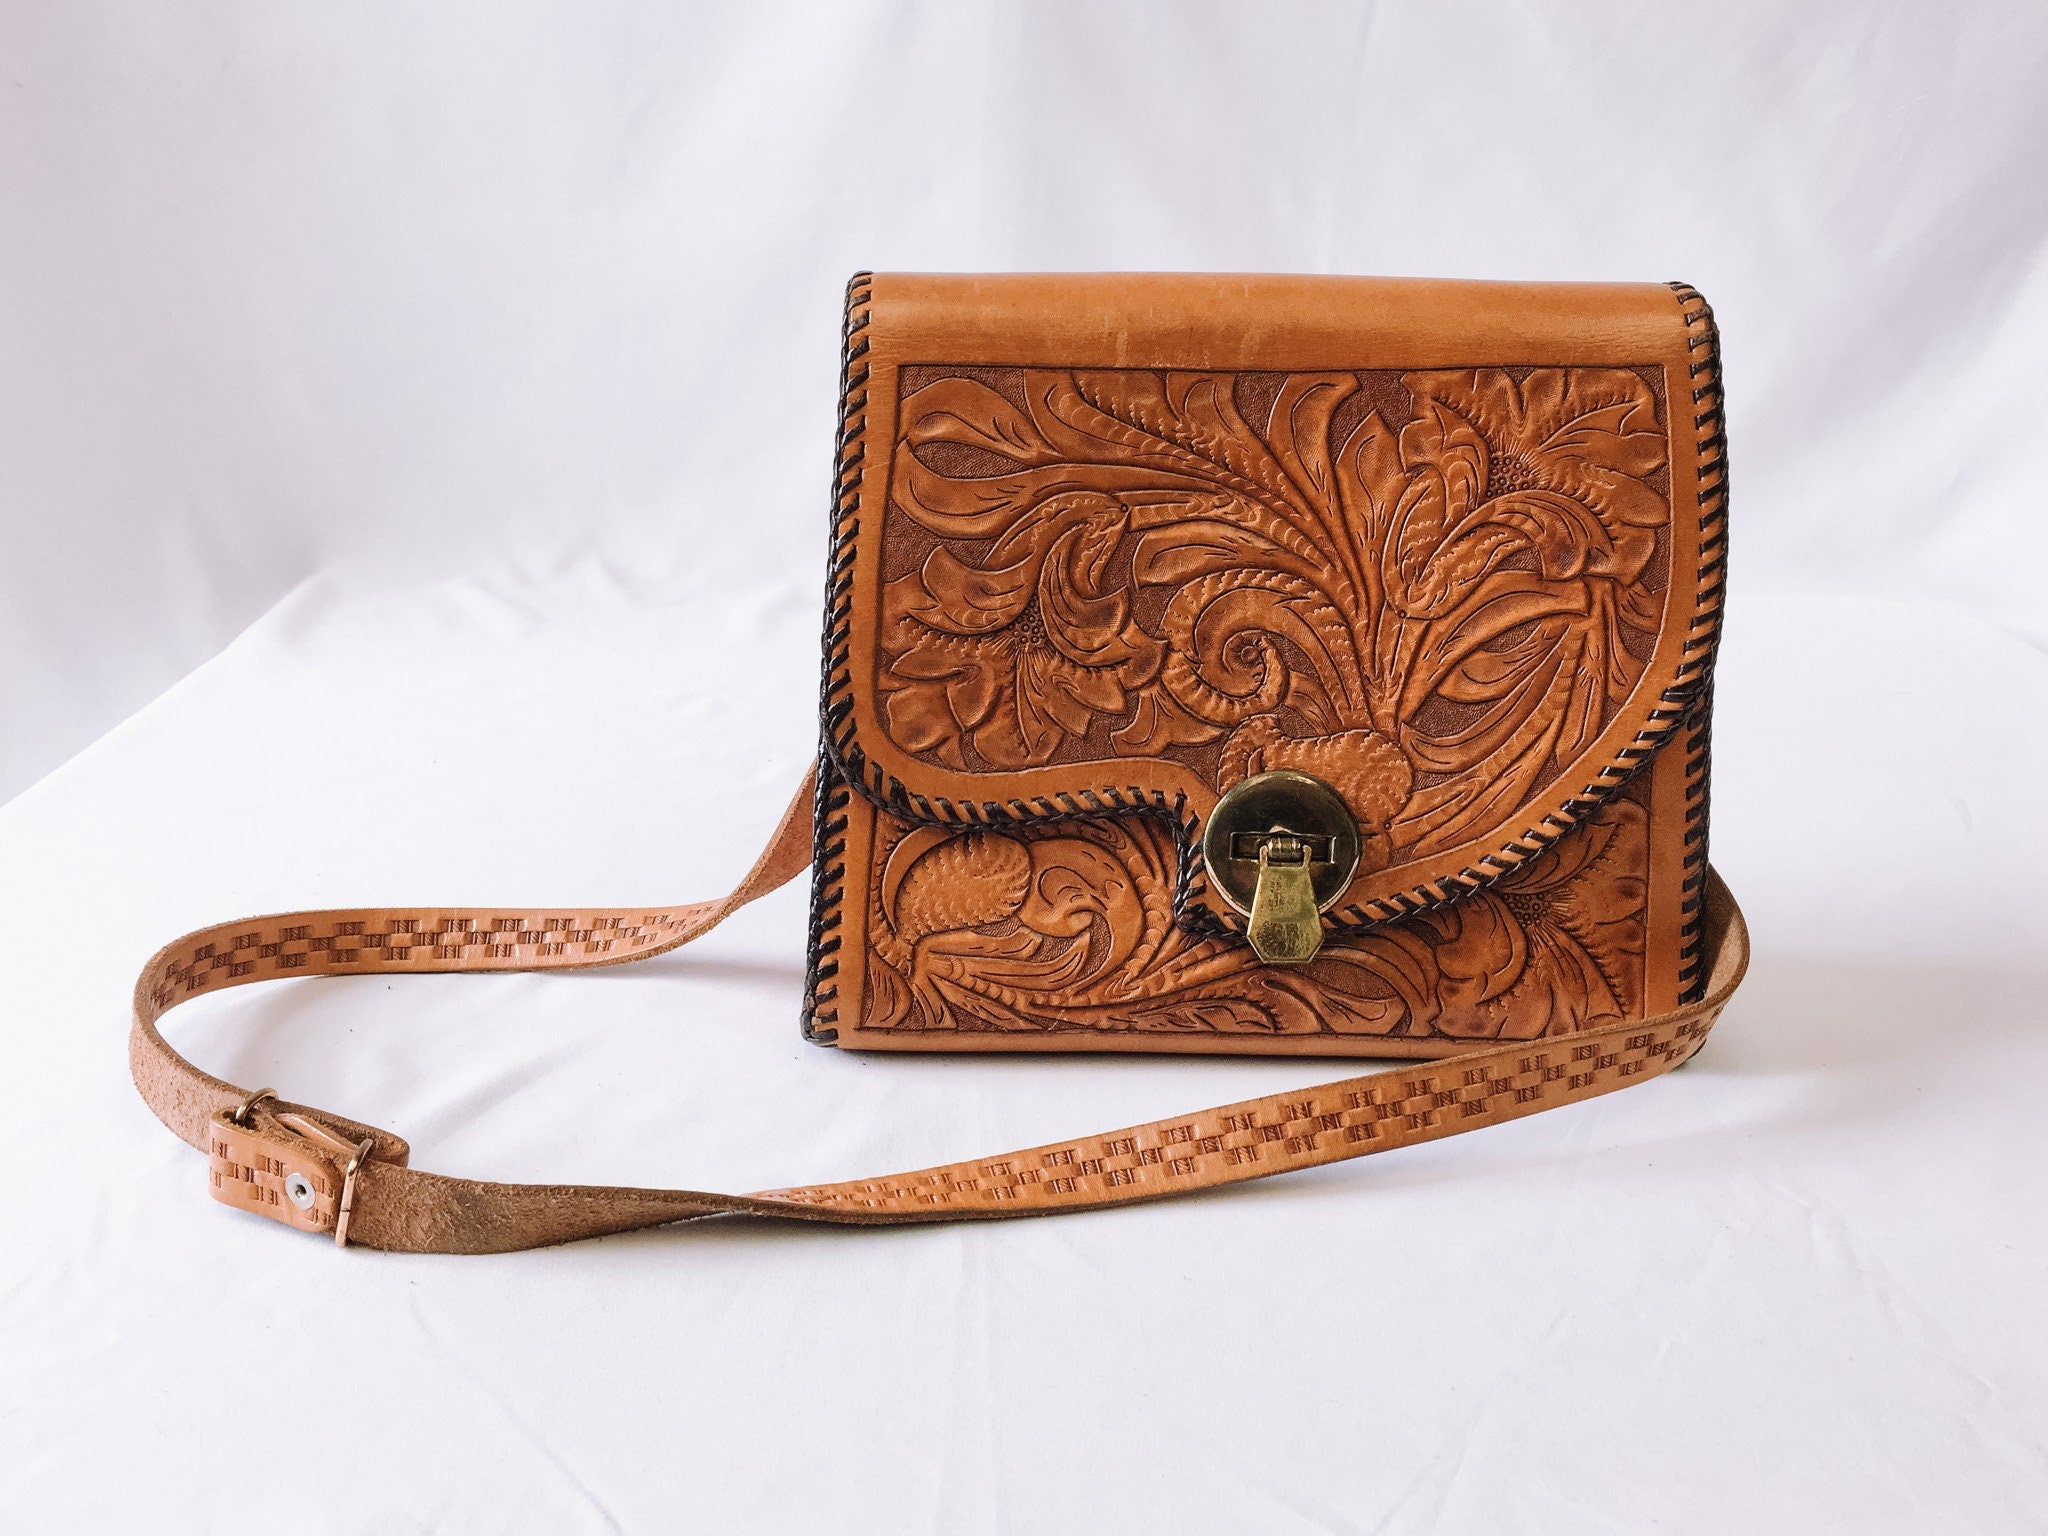 Vintage Leather Brown Mexican Hand Tooled Floral Design Purse by Mont-Abur  | eBay